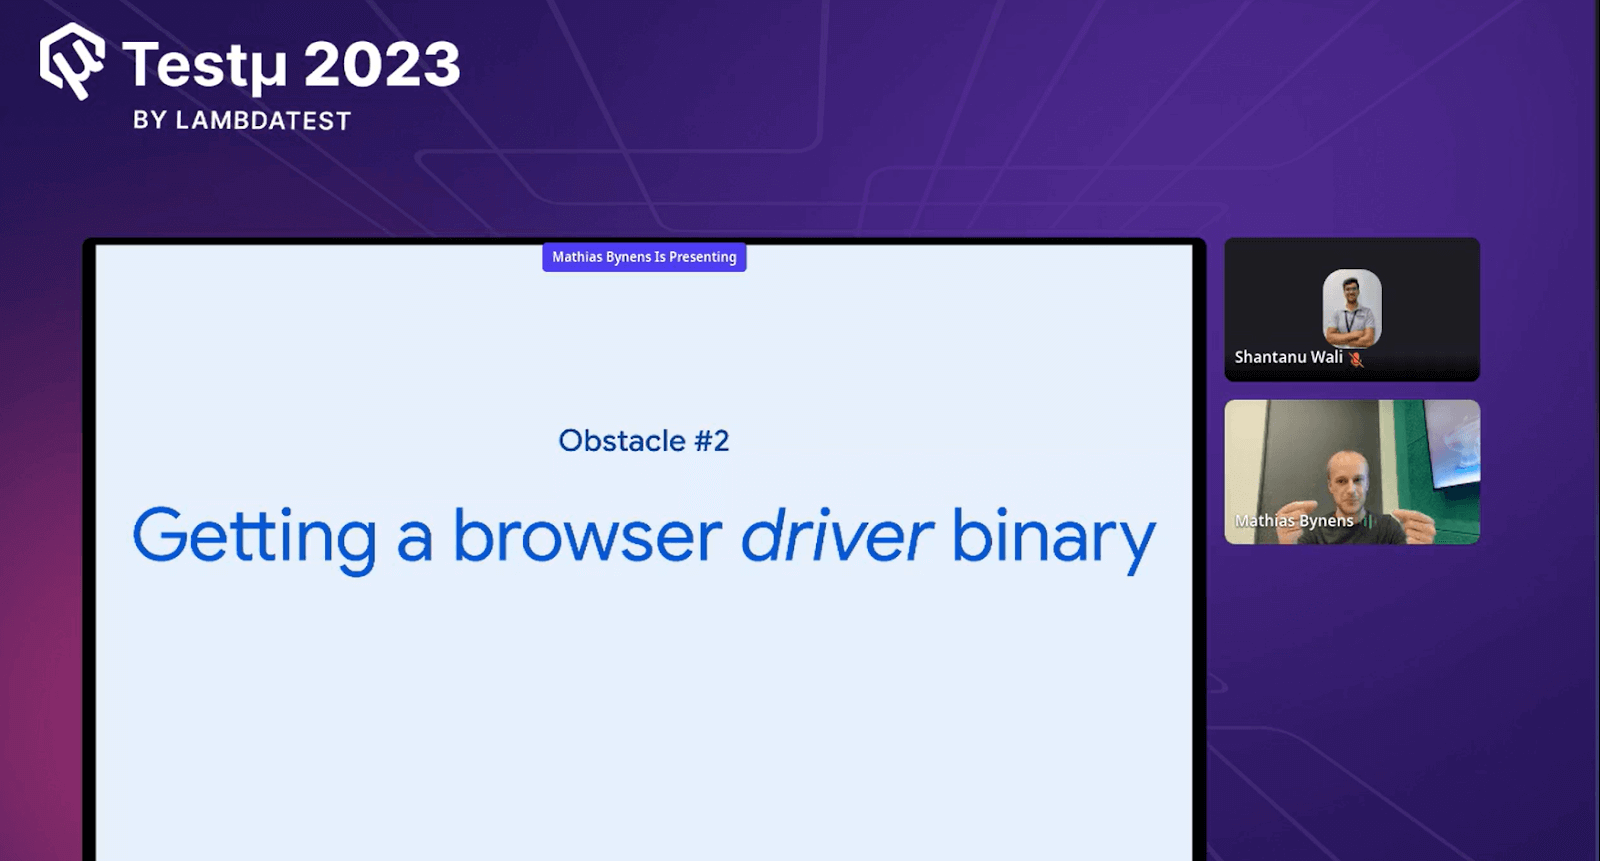 Getting a browser driver binary